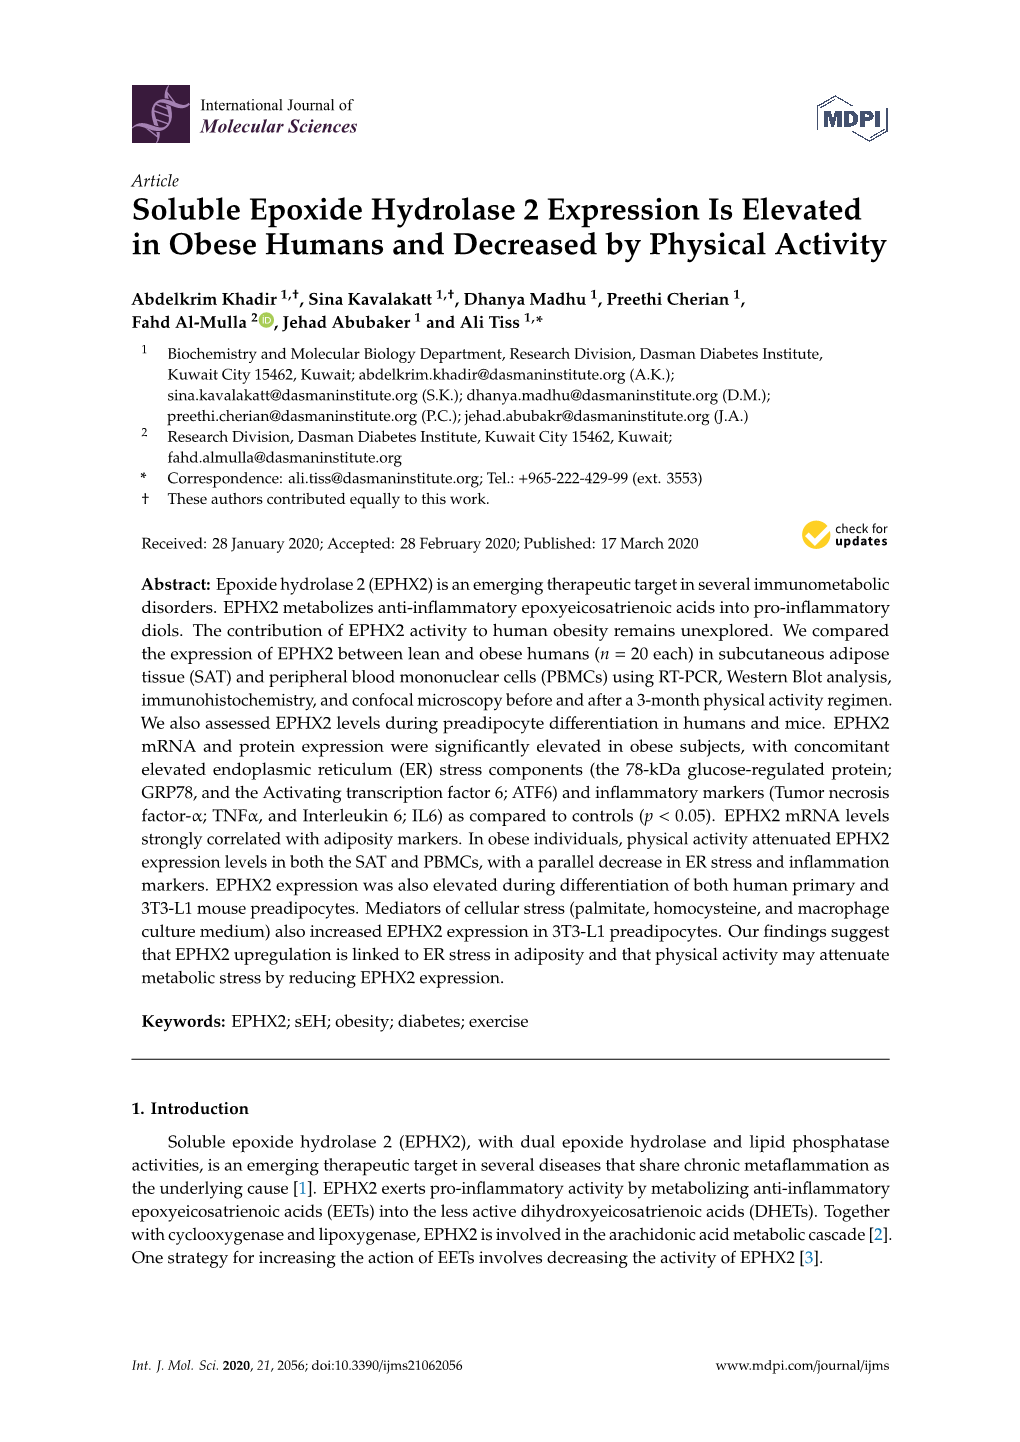 Soluble Epoxide Hydrolase 2 Expression Is Elevated in Obese Humans and Decreased by Physical Activity